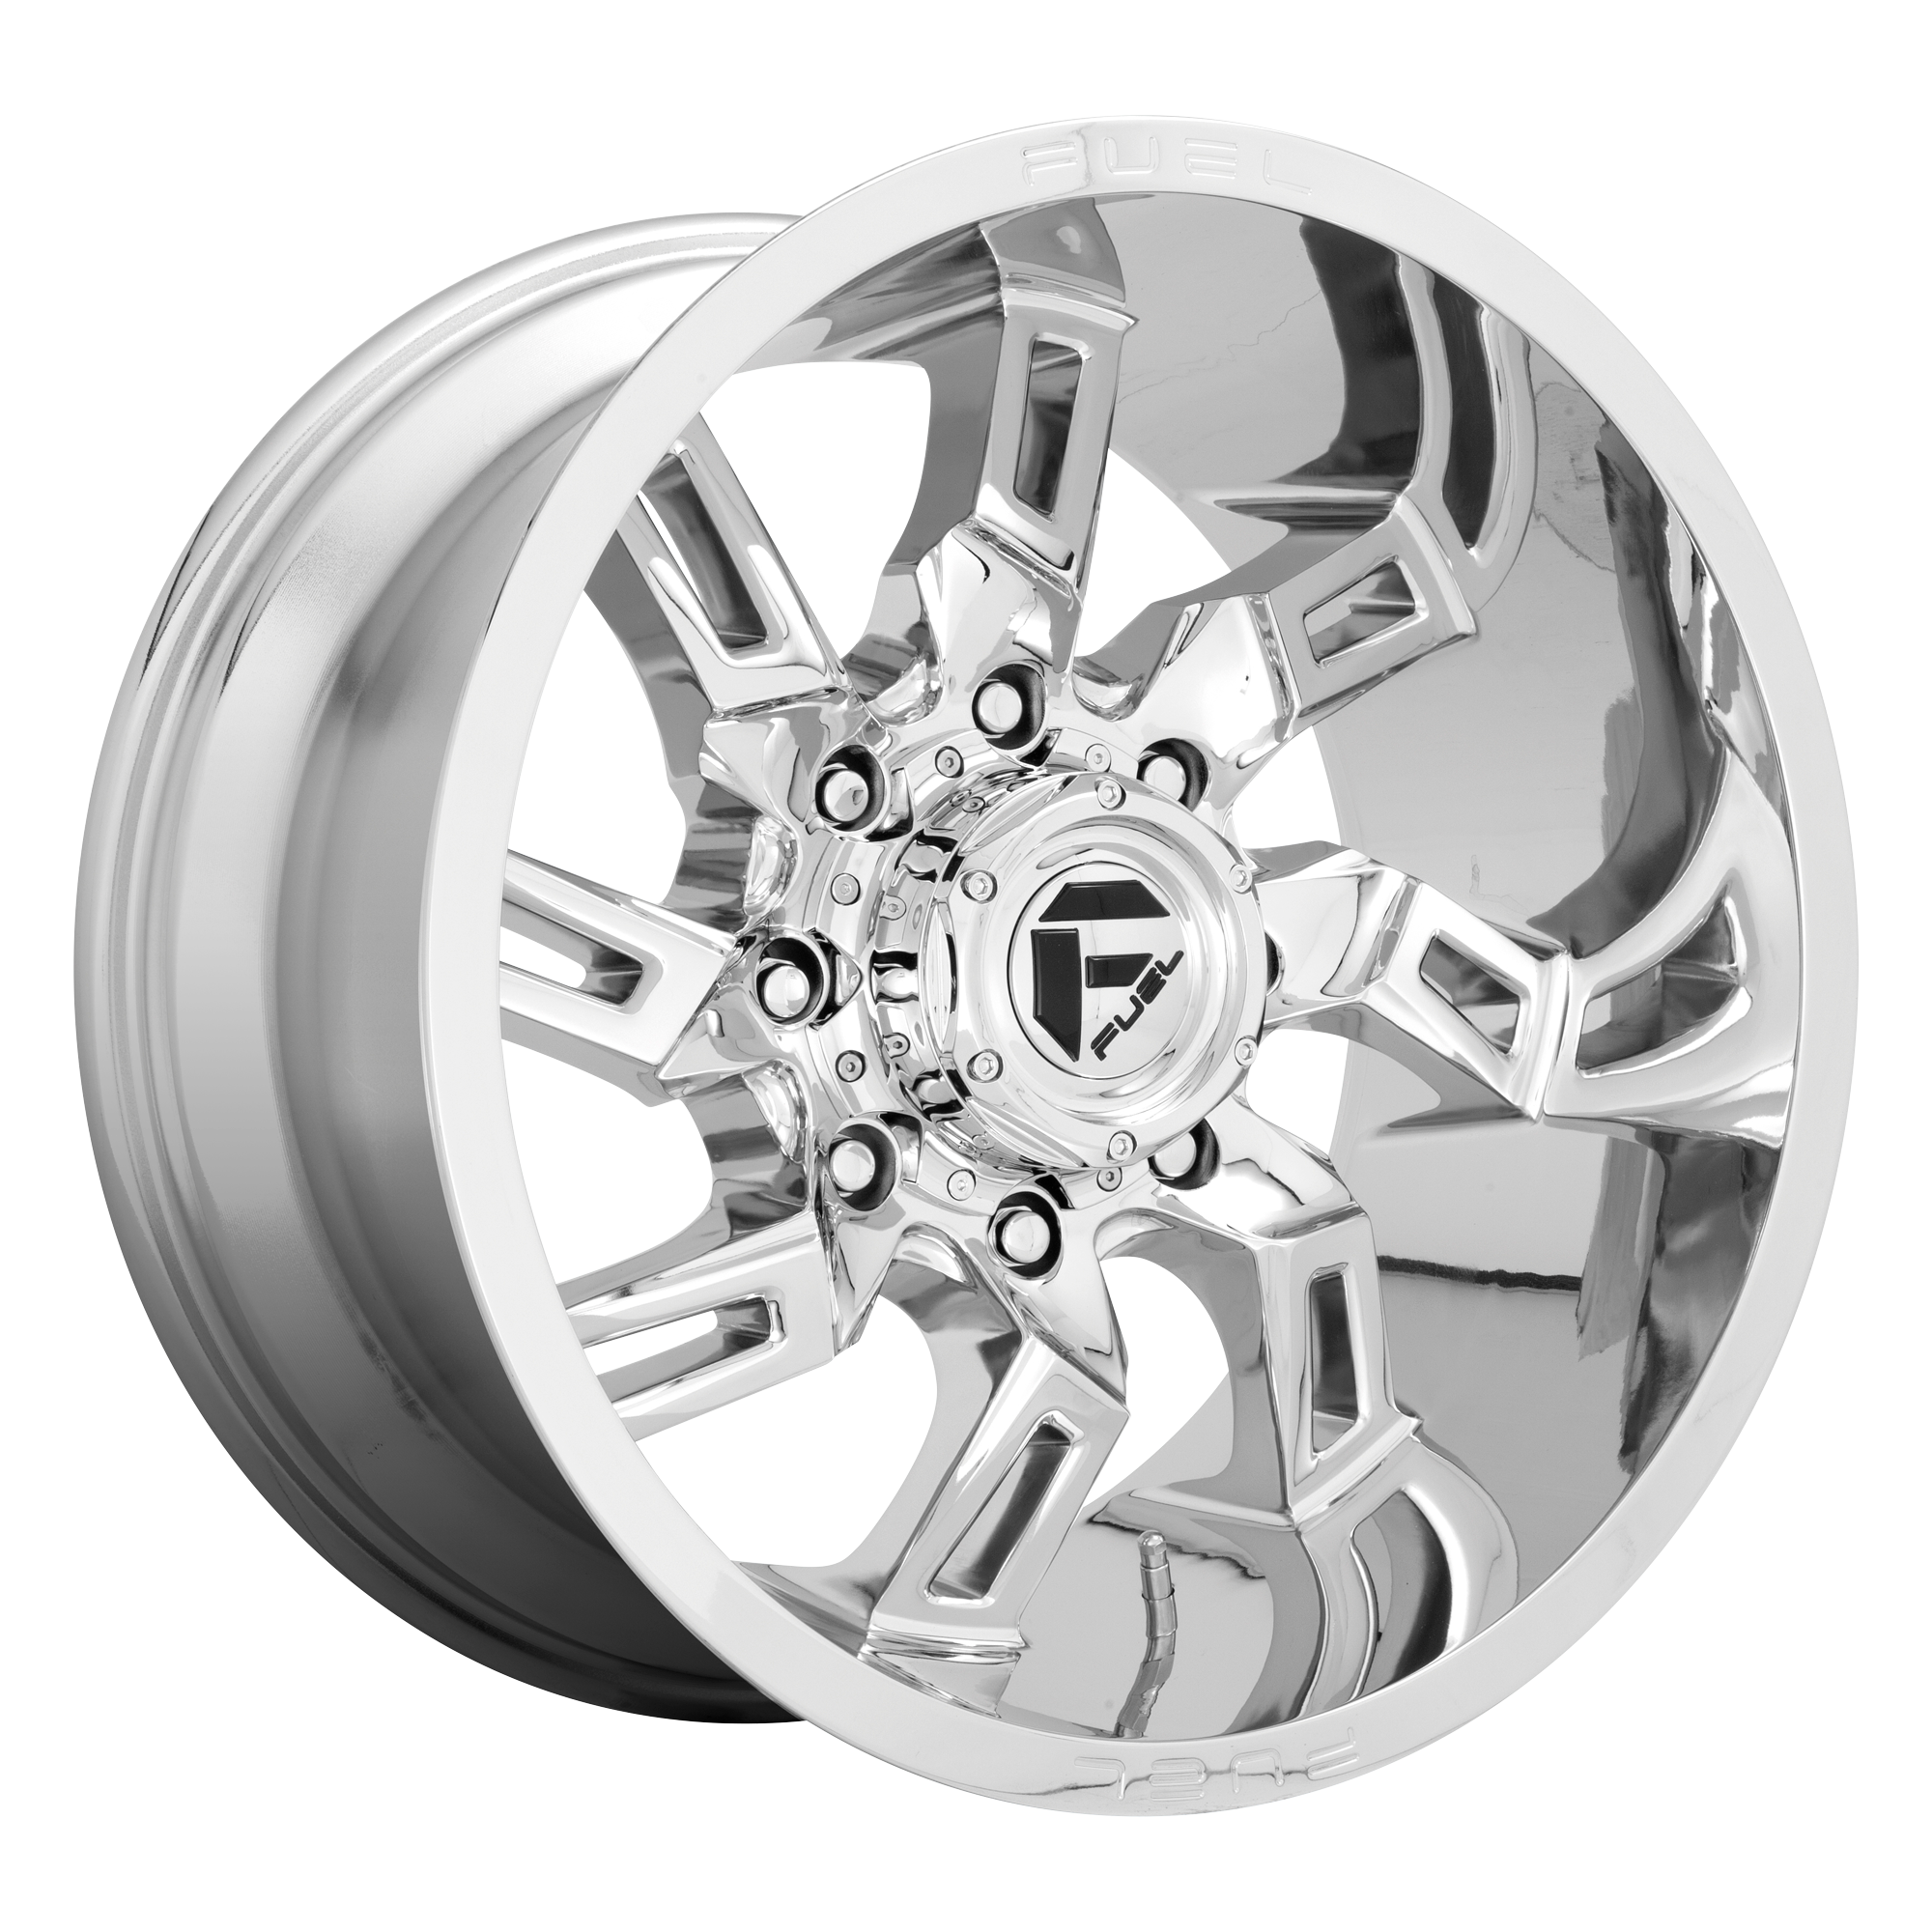 LOCKDOWN 20x9 6x139.70 CHROME (1 mm) - Tires and Engine Performance